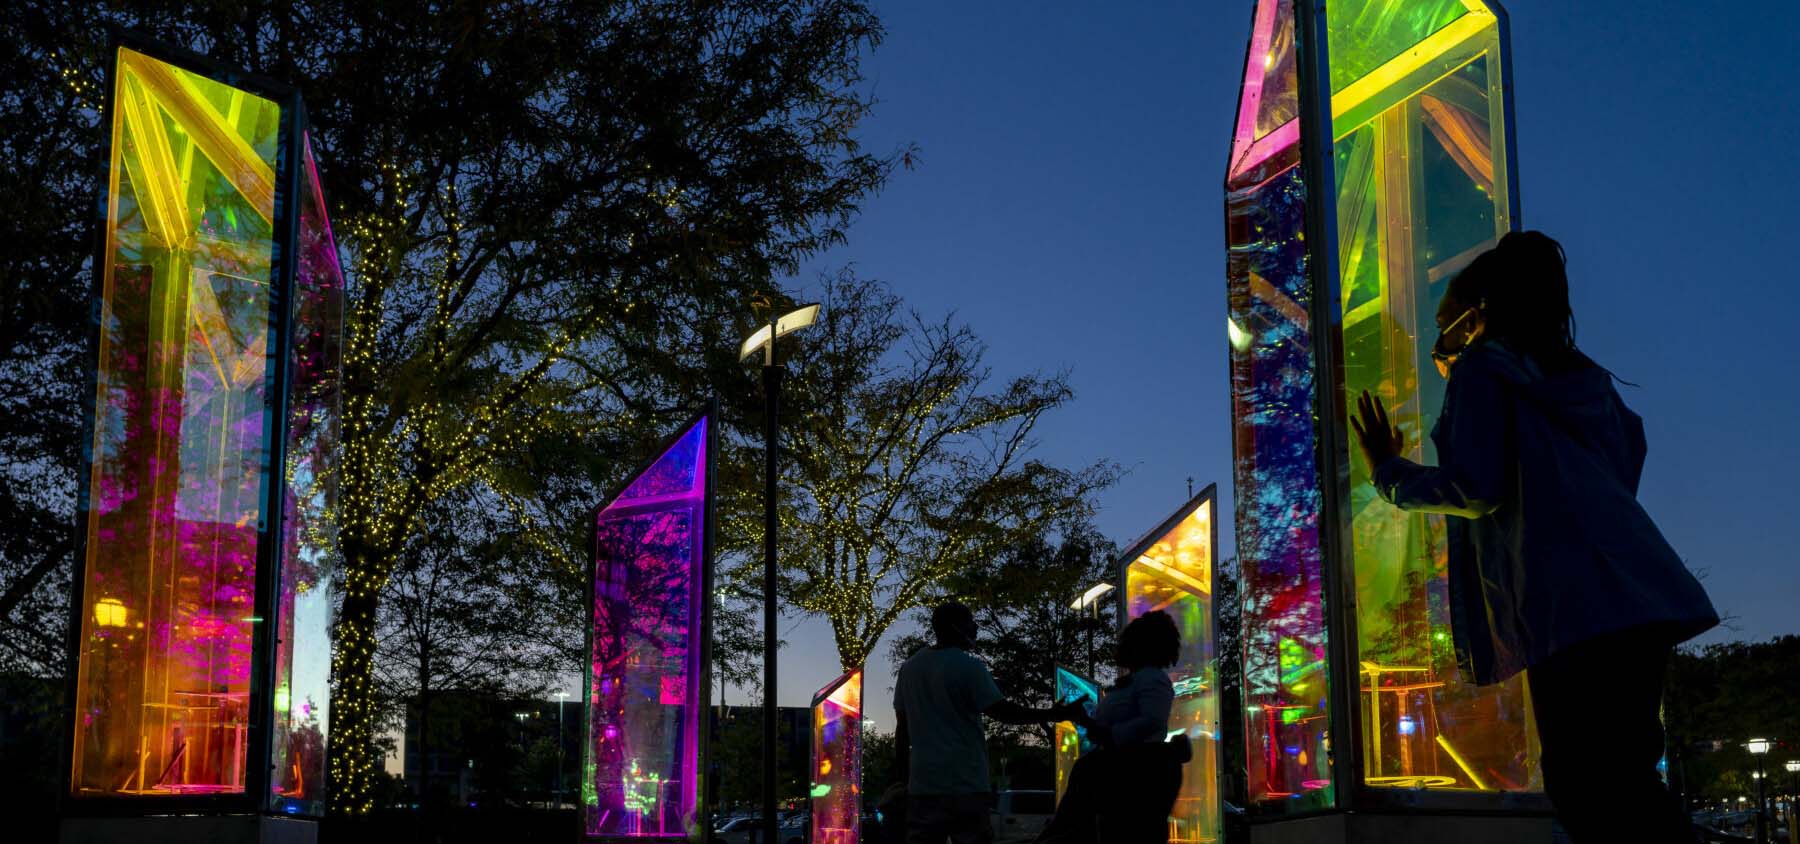 Neon prism outdoor art glowing at sunset.